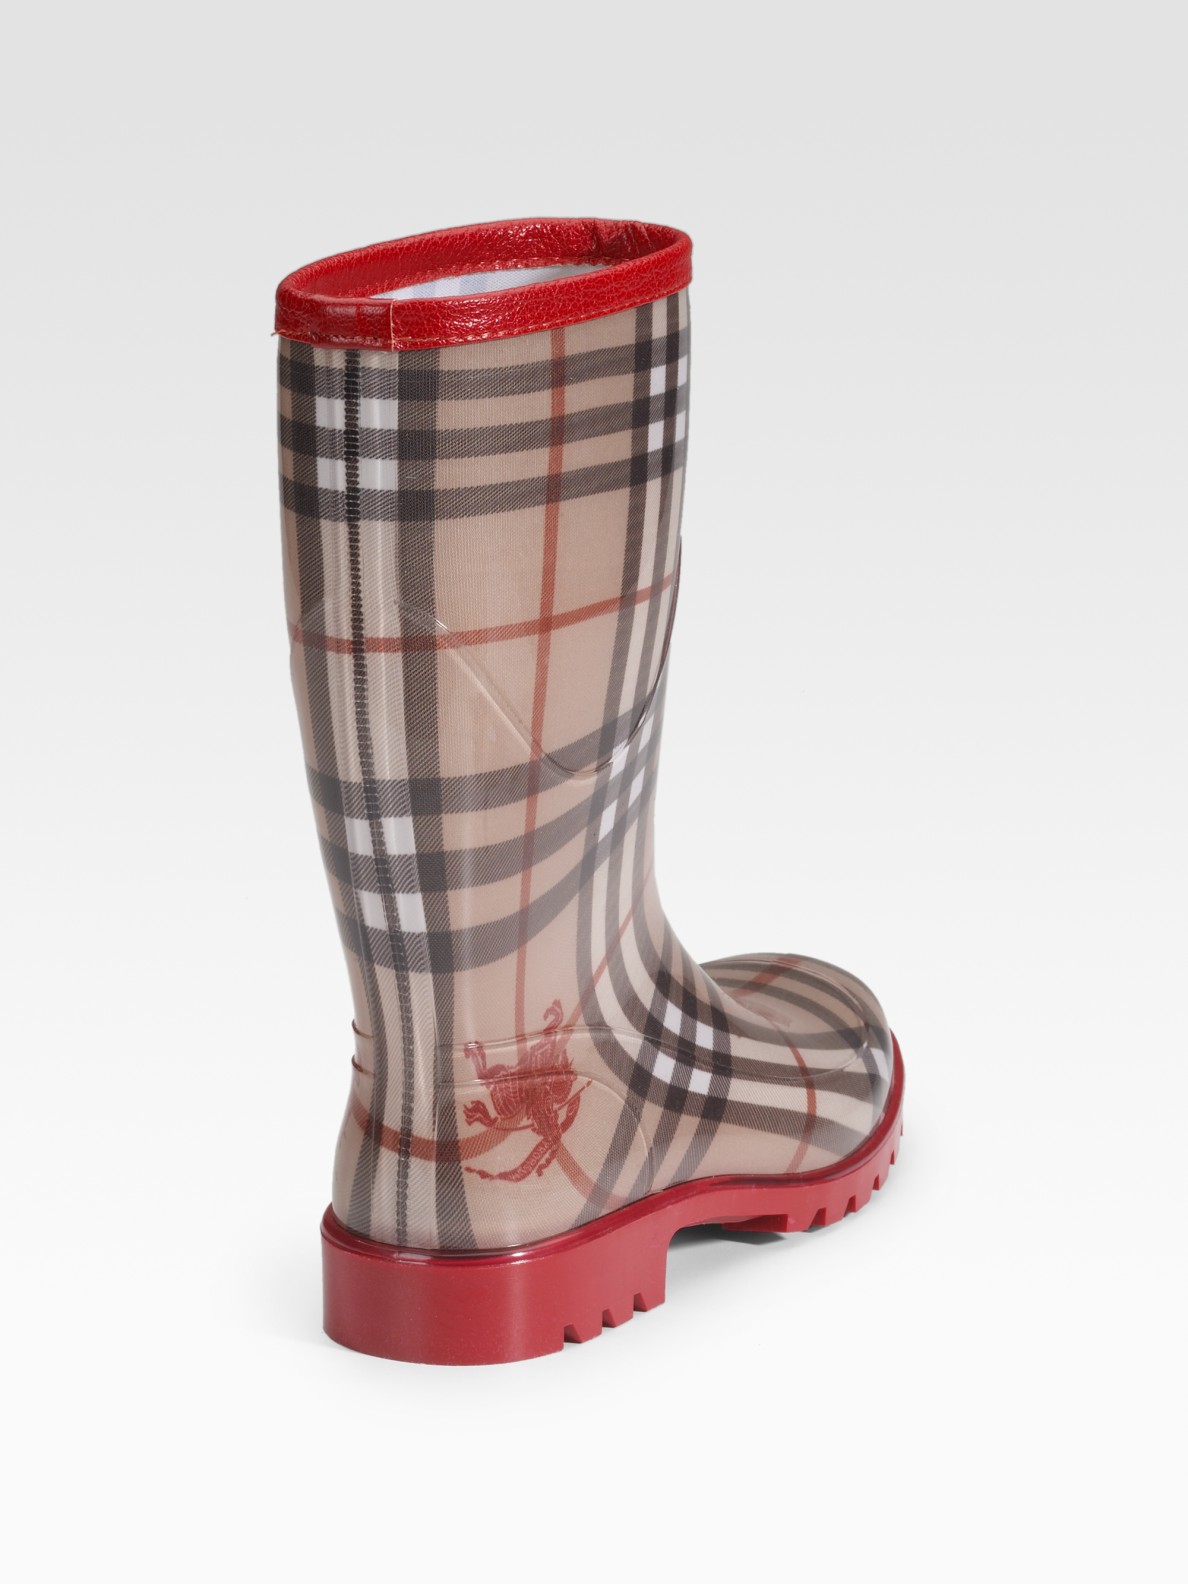 Burberry Rubber Rain Boots in Red - Lyst